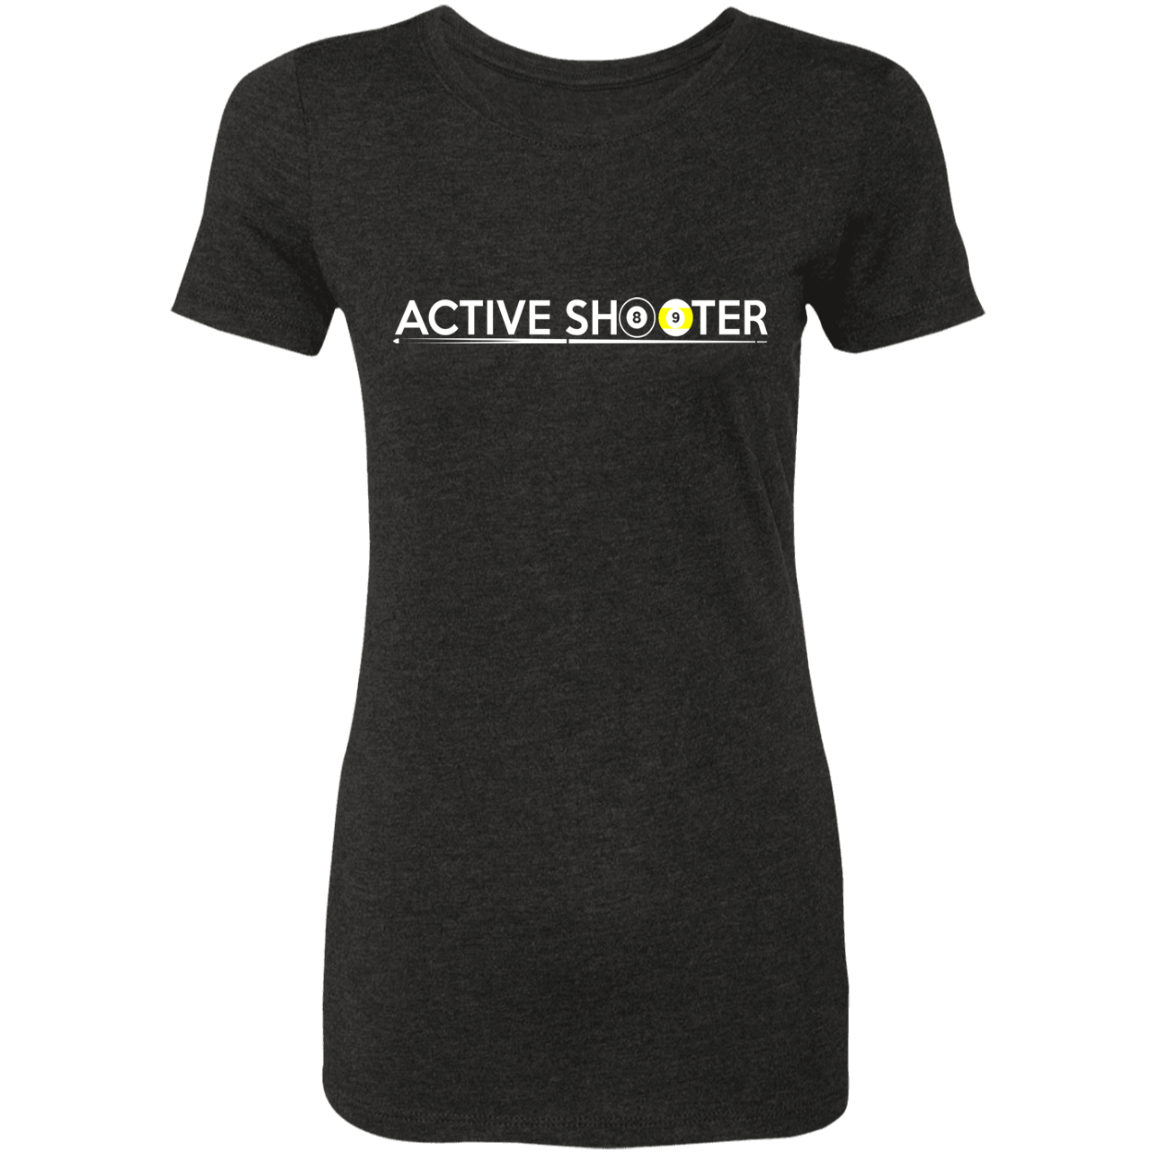 The GHOATS Custom Design #1. Active Shooter. Ladies' Triblend T-Shirt